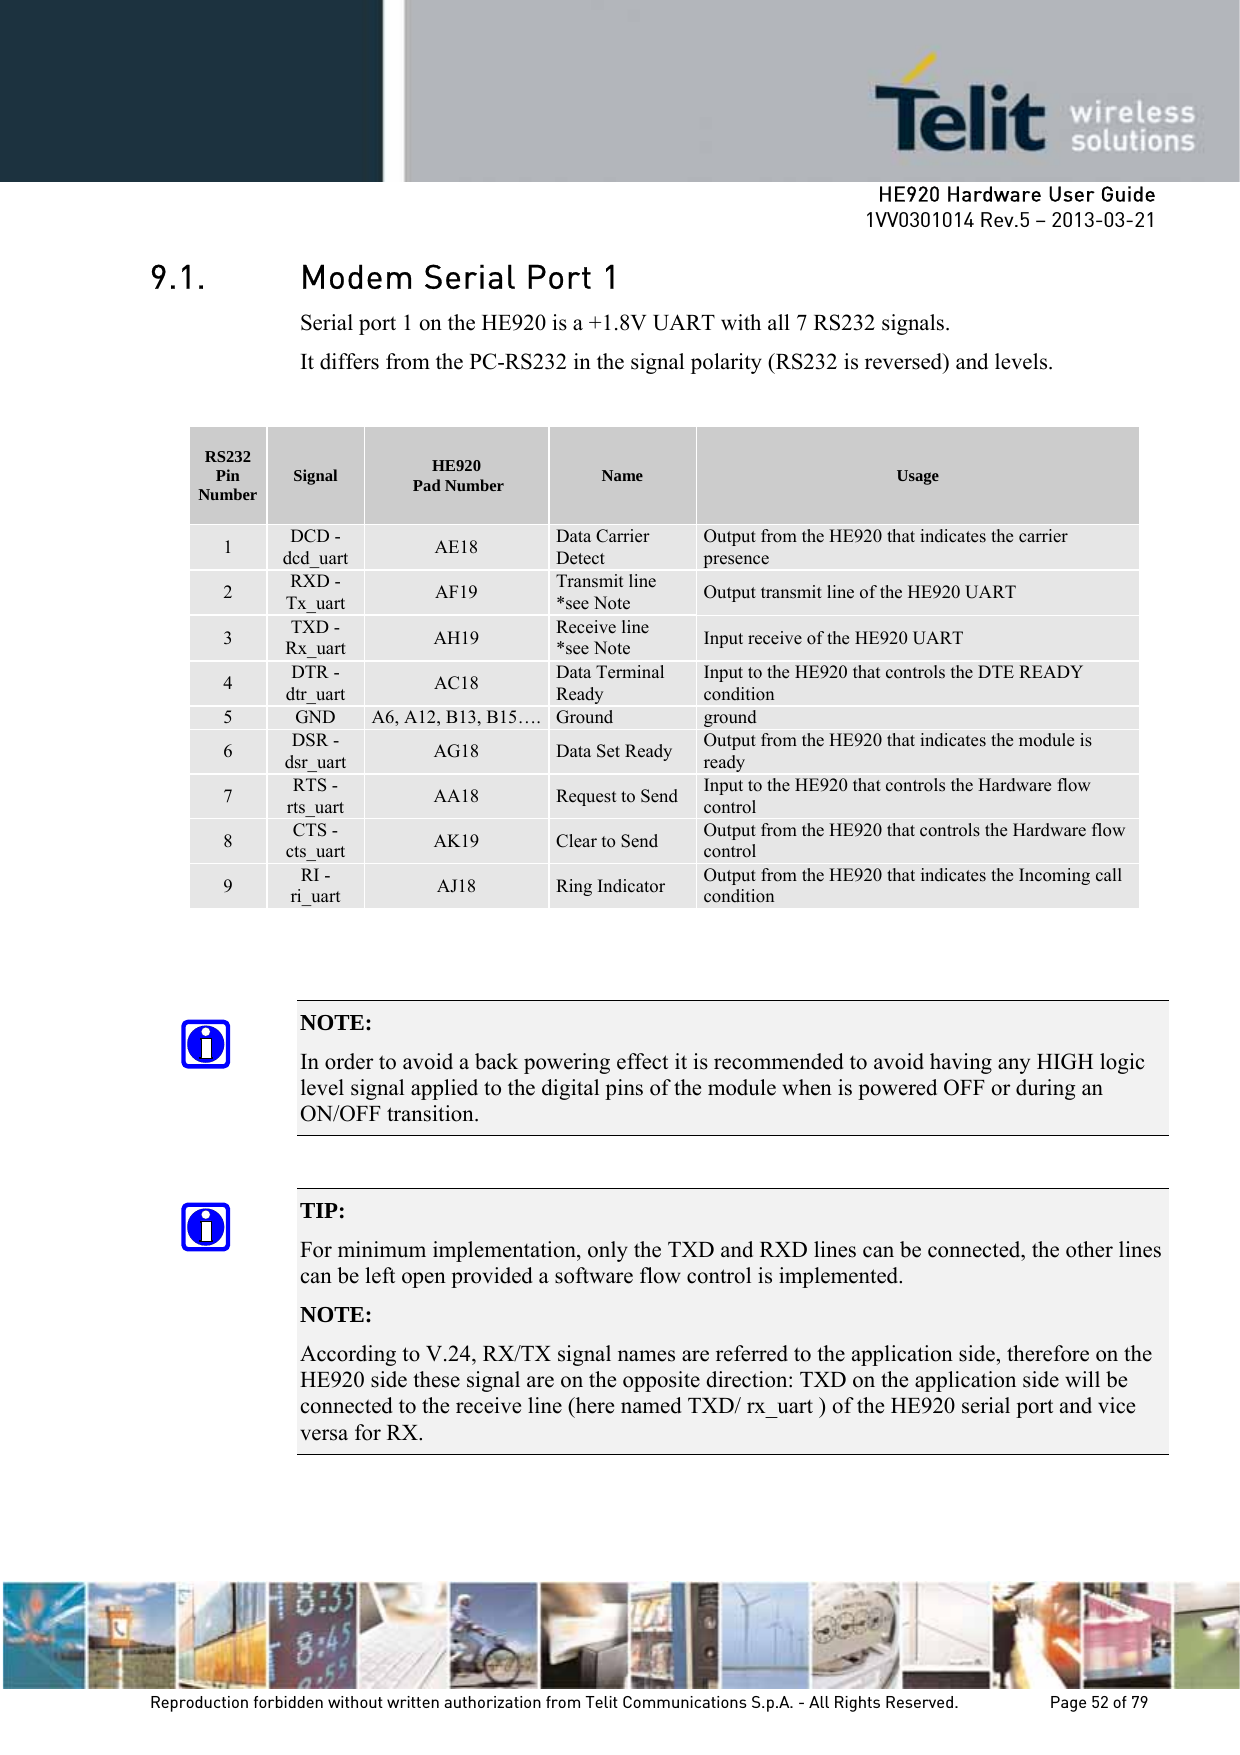     HE920 Hardware User Guide 1VV0301014 Rev.5 – 2013-03-21 Reproduction forbidden without written authorization from Telit Communications S.p.A. - All Rights Reserved.    Page 52 of 79  9.1. Modem Serial Port 1 Serial port 1 on the HE920 is a +1.8V UART with all 7 RS232 signals. It differs from the PC-RS232 in the signal polarity (RS232 is reversed) and levels.  RS232 Pin Number  Signal  HE920  Pad Number  Name  Usage 1  DCD - dcd_uart  AE18  Data Carrier Detect Output from the HE920 that indicates the carrier presence 2  RXD - Tx_uart  AF19  Transmit line *see Note  Output transmit line of the HE920 UART 3  TXD - Rx_uart  AH19  Receive line  *see Note  Input receive of the HE920 UART 4  DTR - dtr_uart  AC18  Data Terminal Ready Input to the HE920 that controls the DTE READY condition 5  GND  A6, A12, B13, B15…. Ground  ground 6  DSR - dsr_uart  AG18  Data Set Ready  Output from the HE920 that indicates the module is ready 7  RTS -rts_uart  AA18  Request to Send Input to the HE920 that controls the Hardware flow control 8  CTS - cts_uart  AK19  Clear to Send  Output from the HE920 that controls the Hardware flow control 9  RI - ri_uart  AJ18  Ring Indicator  Output from the HE920 that indicates the Incoming call condition   NOTE:  In order to avoid a back powering effect it is recommended to avoid having any HIGH logic level signal applied to the digital pins of the module when is powered OFF or during an ON/OFF transition.  TIP:  For minimum implementation, only the TXD and RXD lines can be connected, the other lines can be left open provided a software flow control is implemented. NOTE:  According to V.24, RX/TX signal names are referred to the application side, therefore on the HE920 side these signal are on the opposite direction: TXD on the application side will be connected to the receive line (here named TXD/ rx_uart ) of the HE920 serial port and vice versa for RX.  